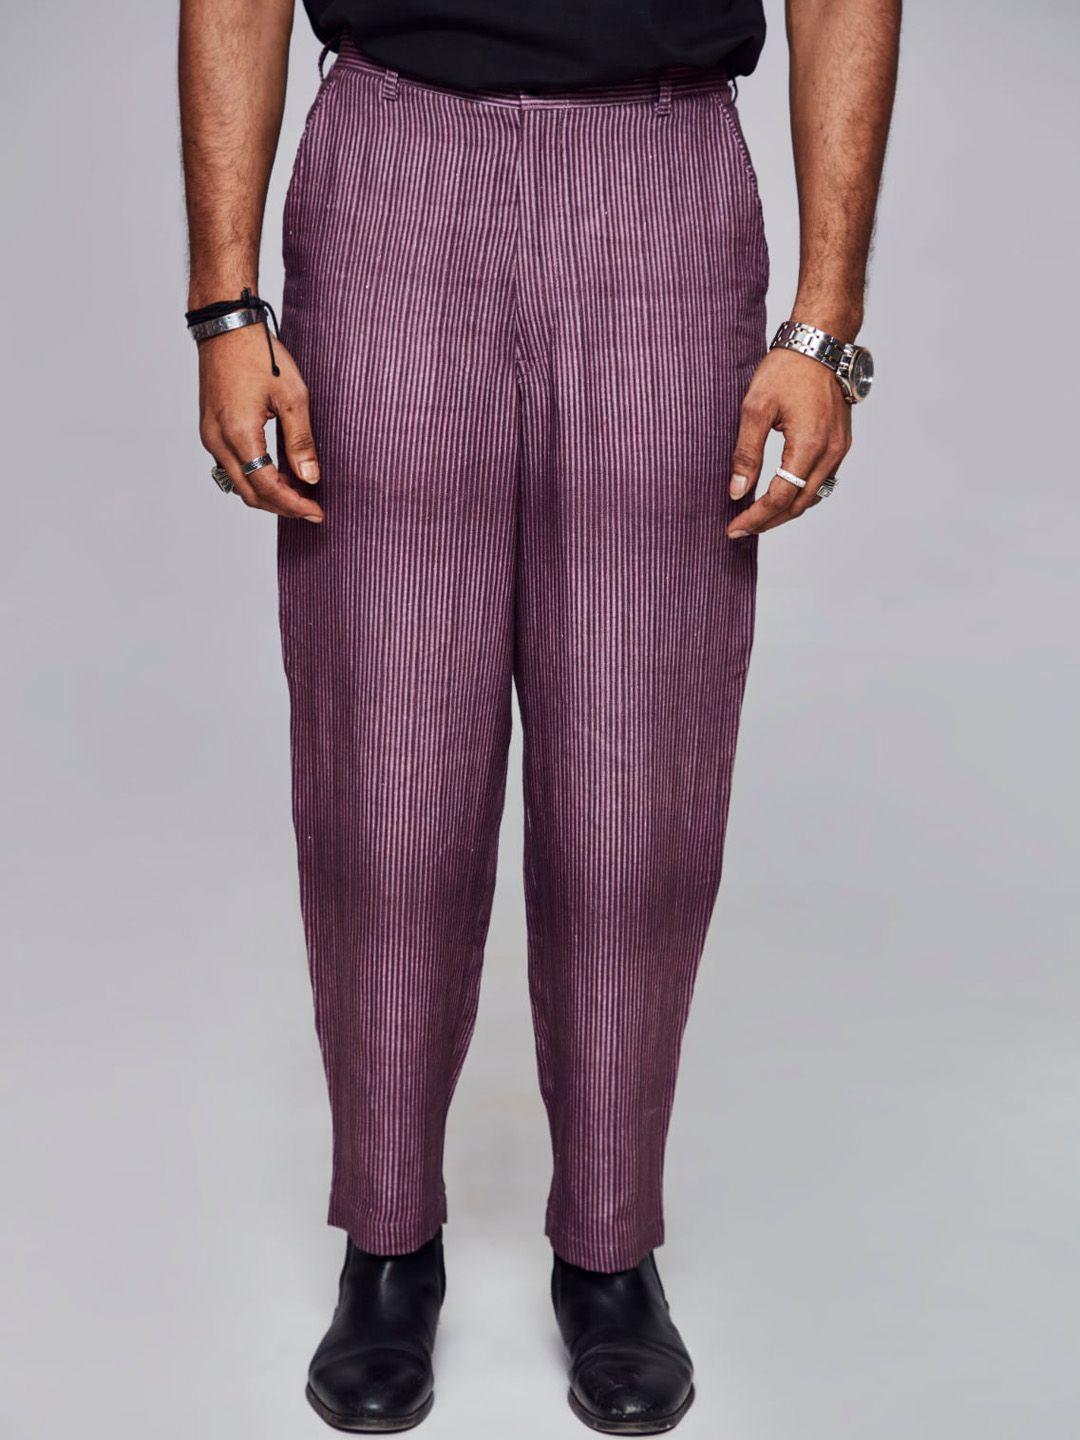 addy's for men striped mid rise plain linen trousers